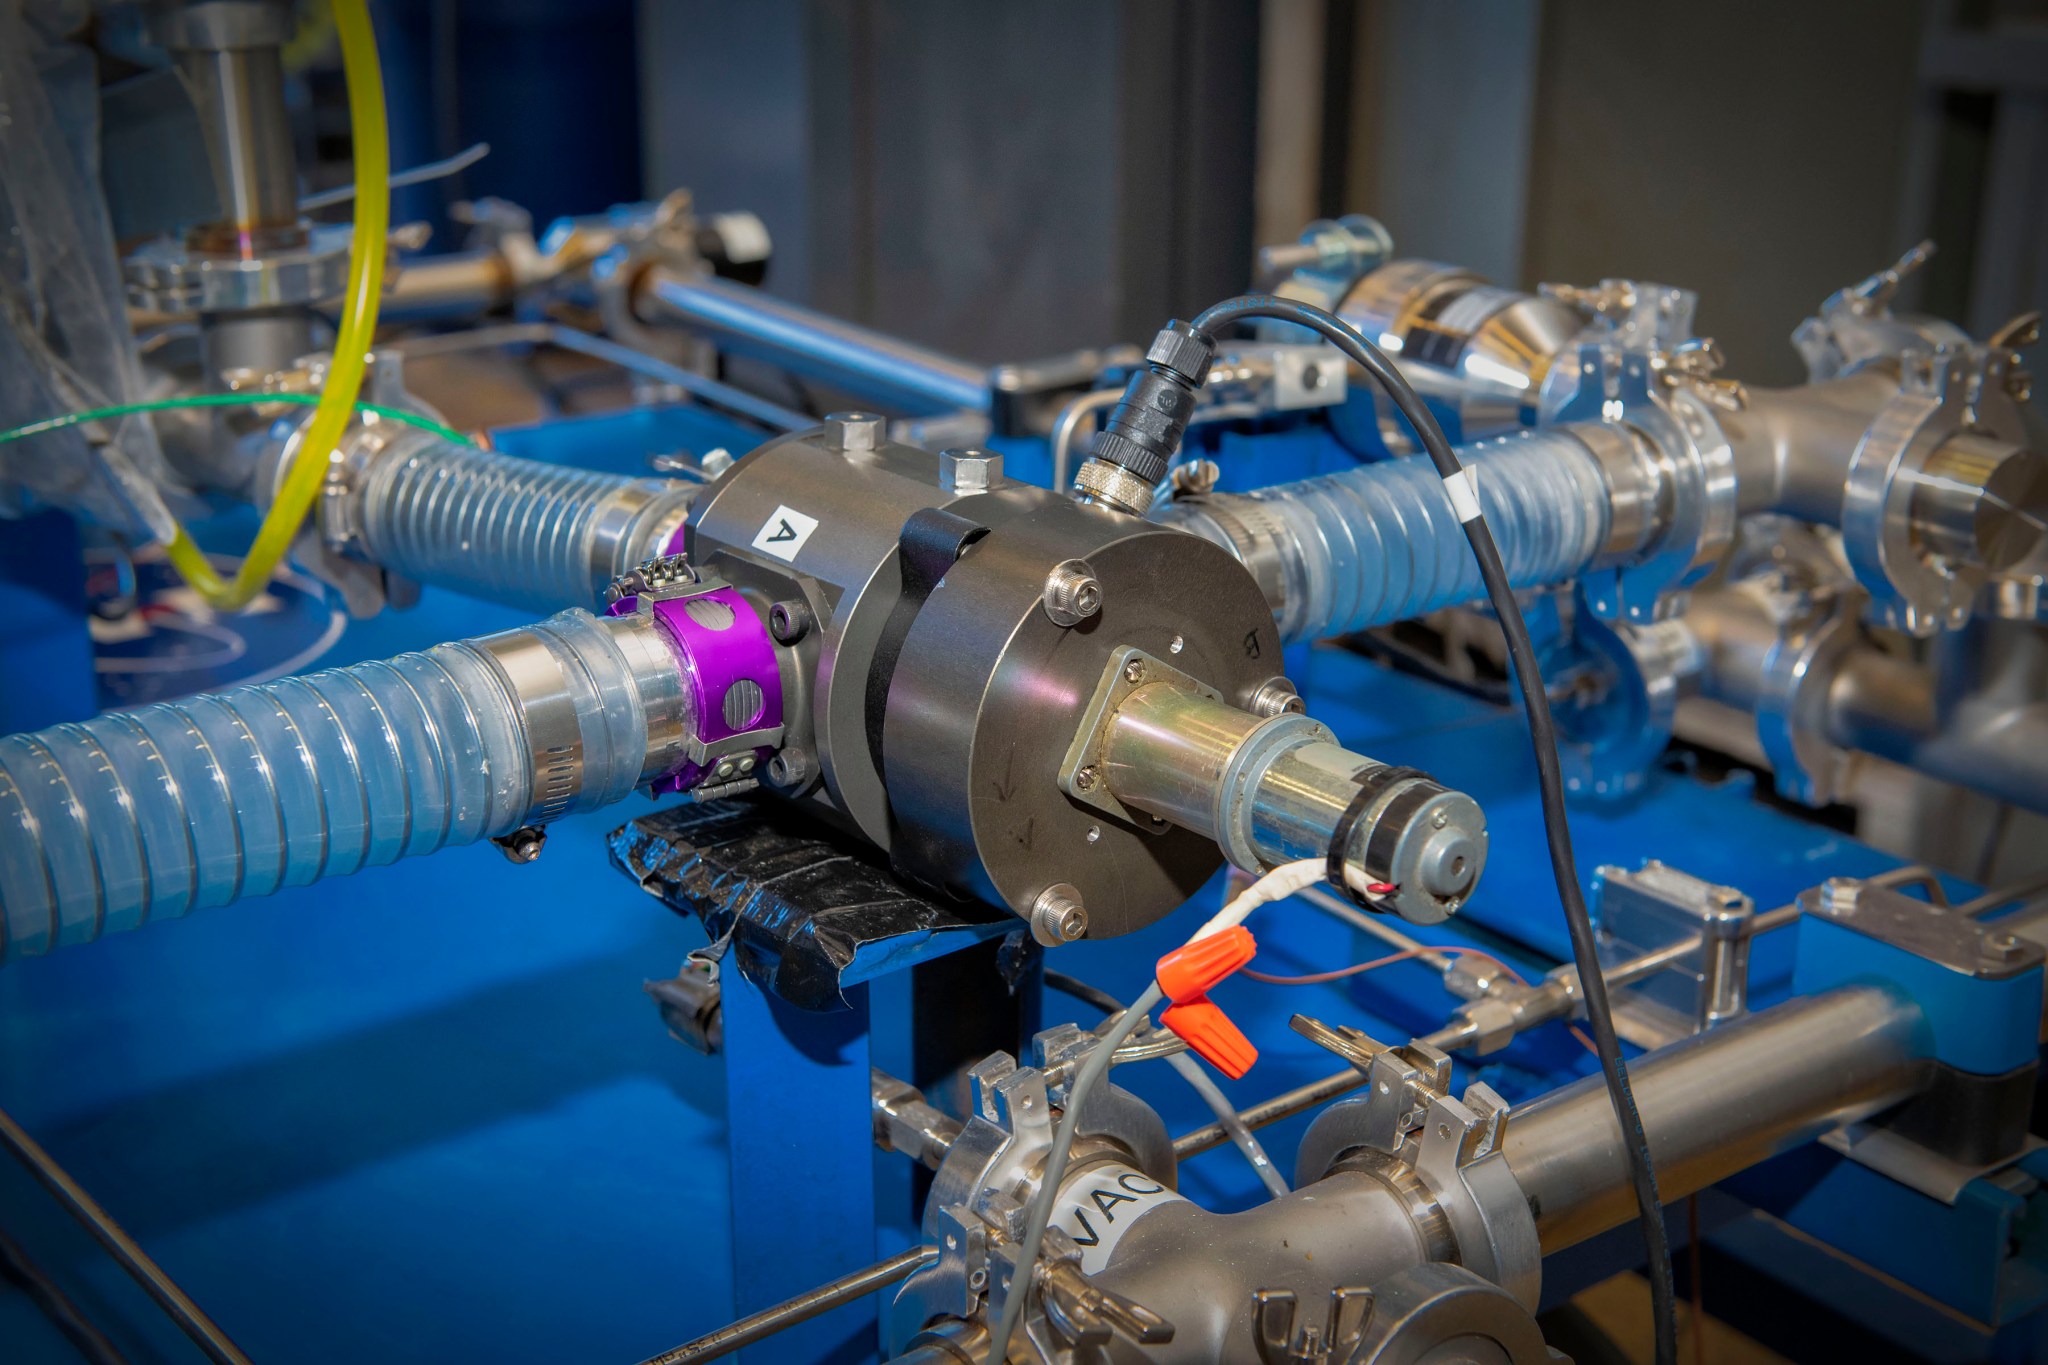 This carbon dioxide valve, developed at Marshall, will help pave the way to support long-term human deep space exploration.